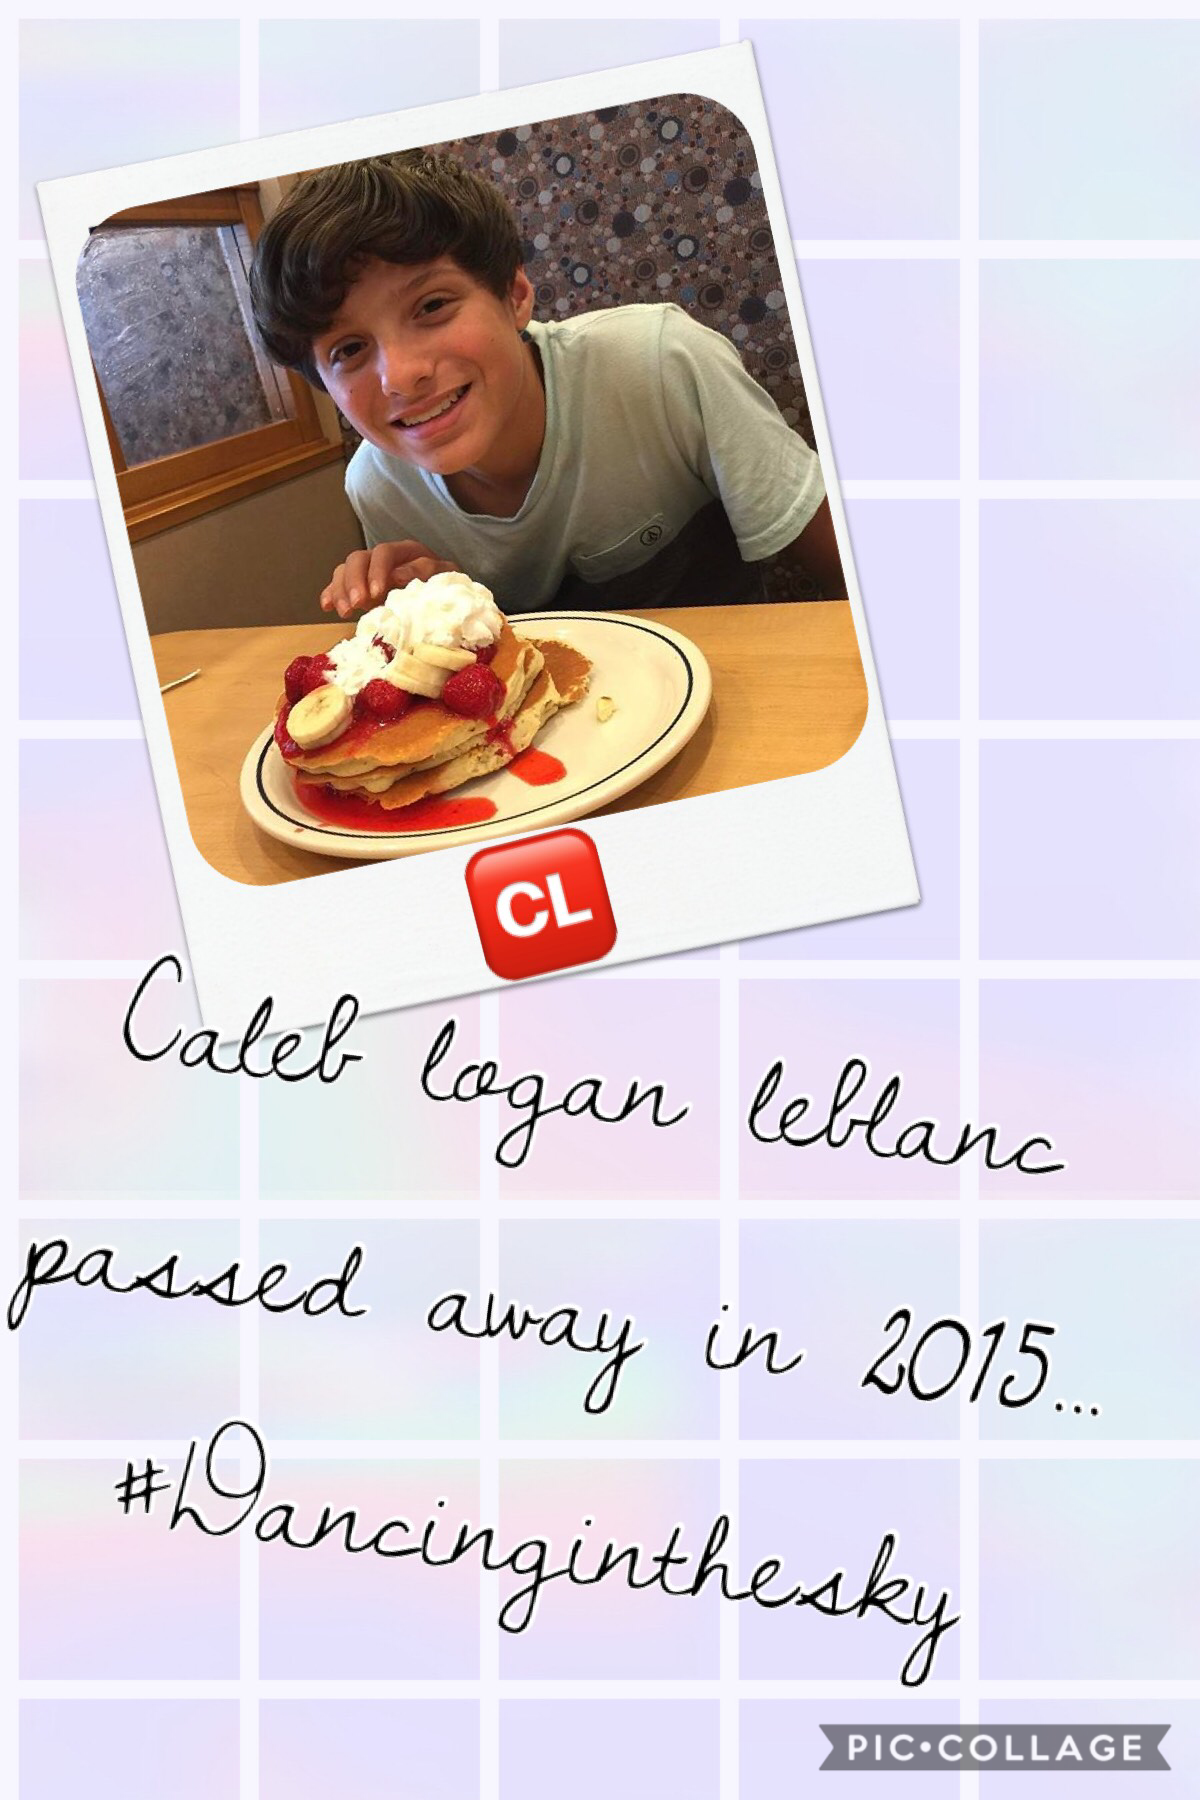 He is now 15, and Annie loved more days then caleb. The 🆑 emoji is for him, stands for caleb logan but usually celebrate life!! At the end of their vids the baked potatoe is in honr of him!! We love u Caleb!!